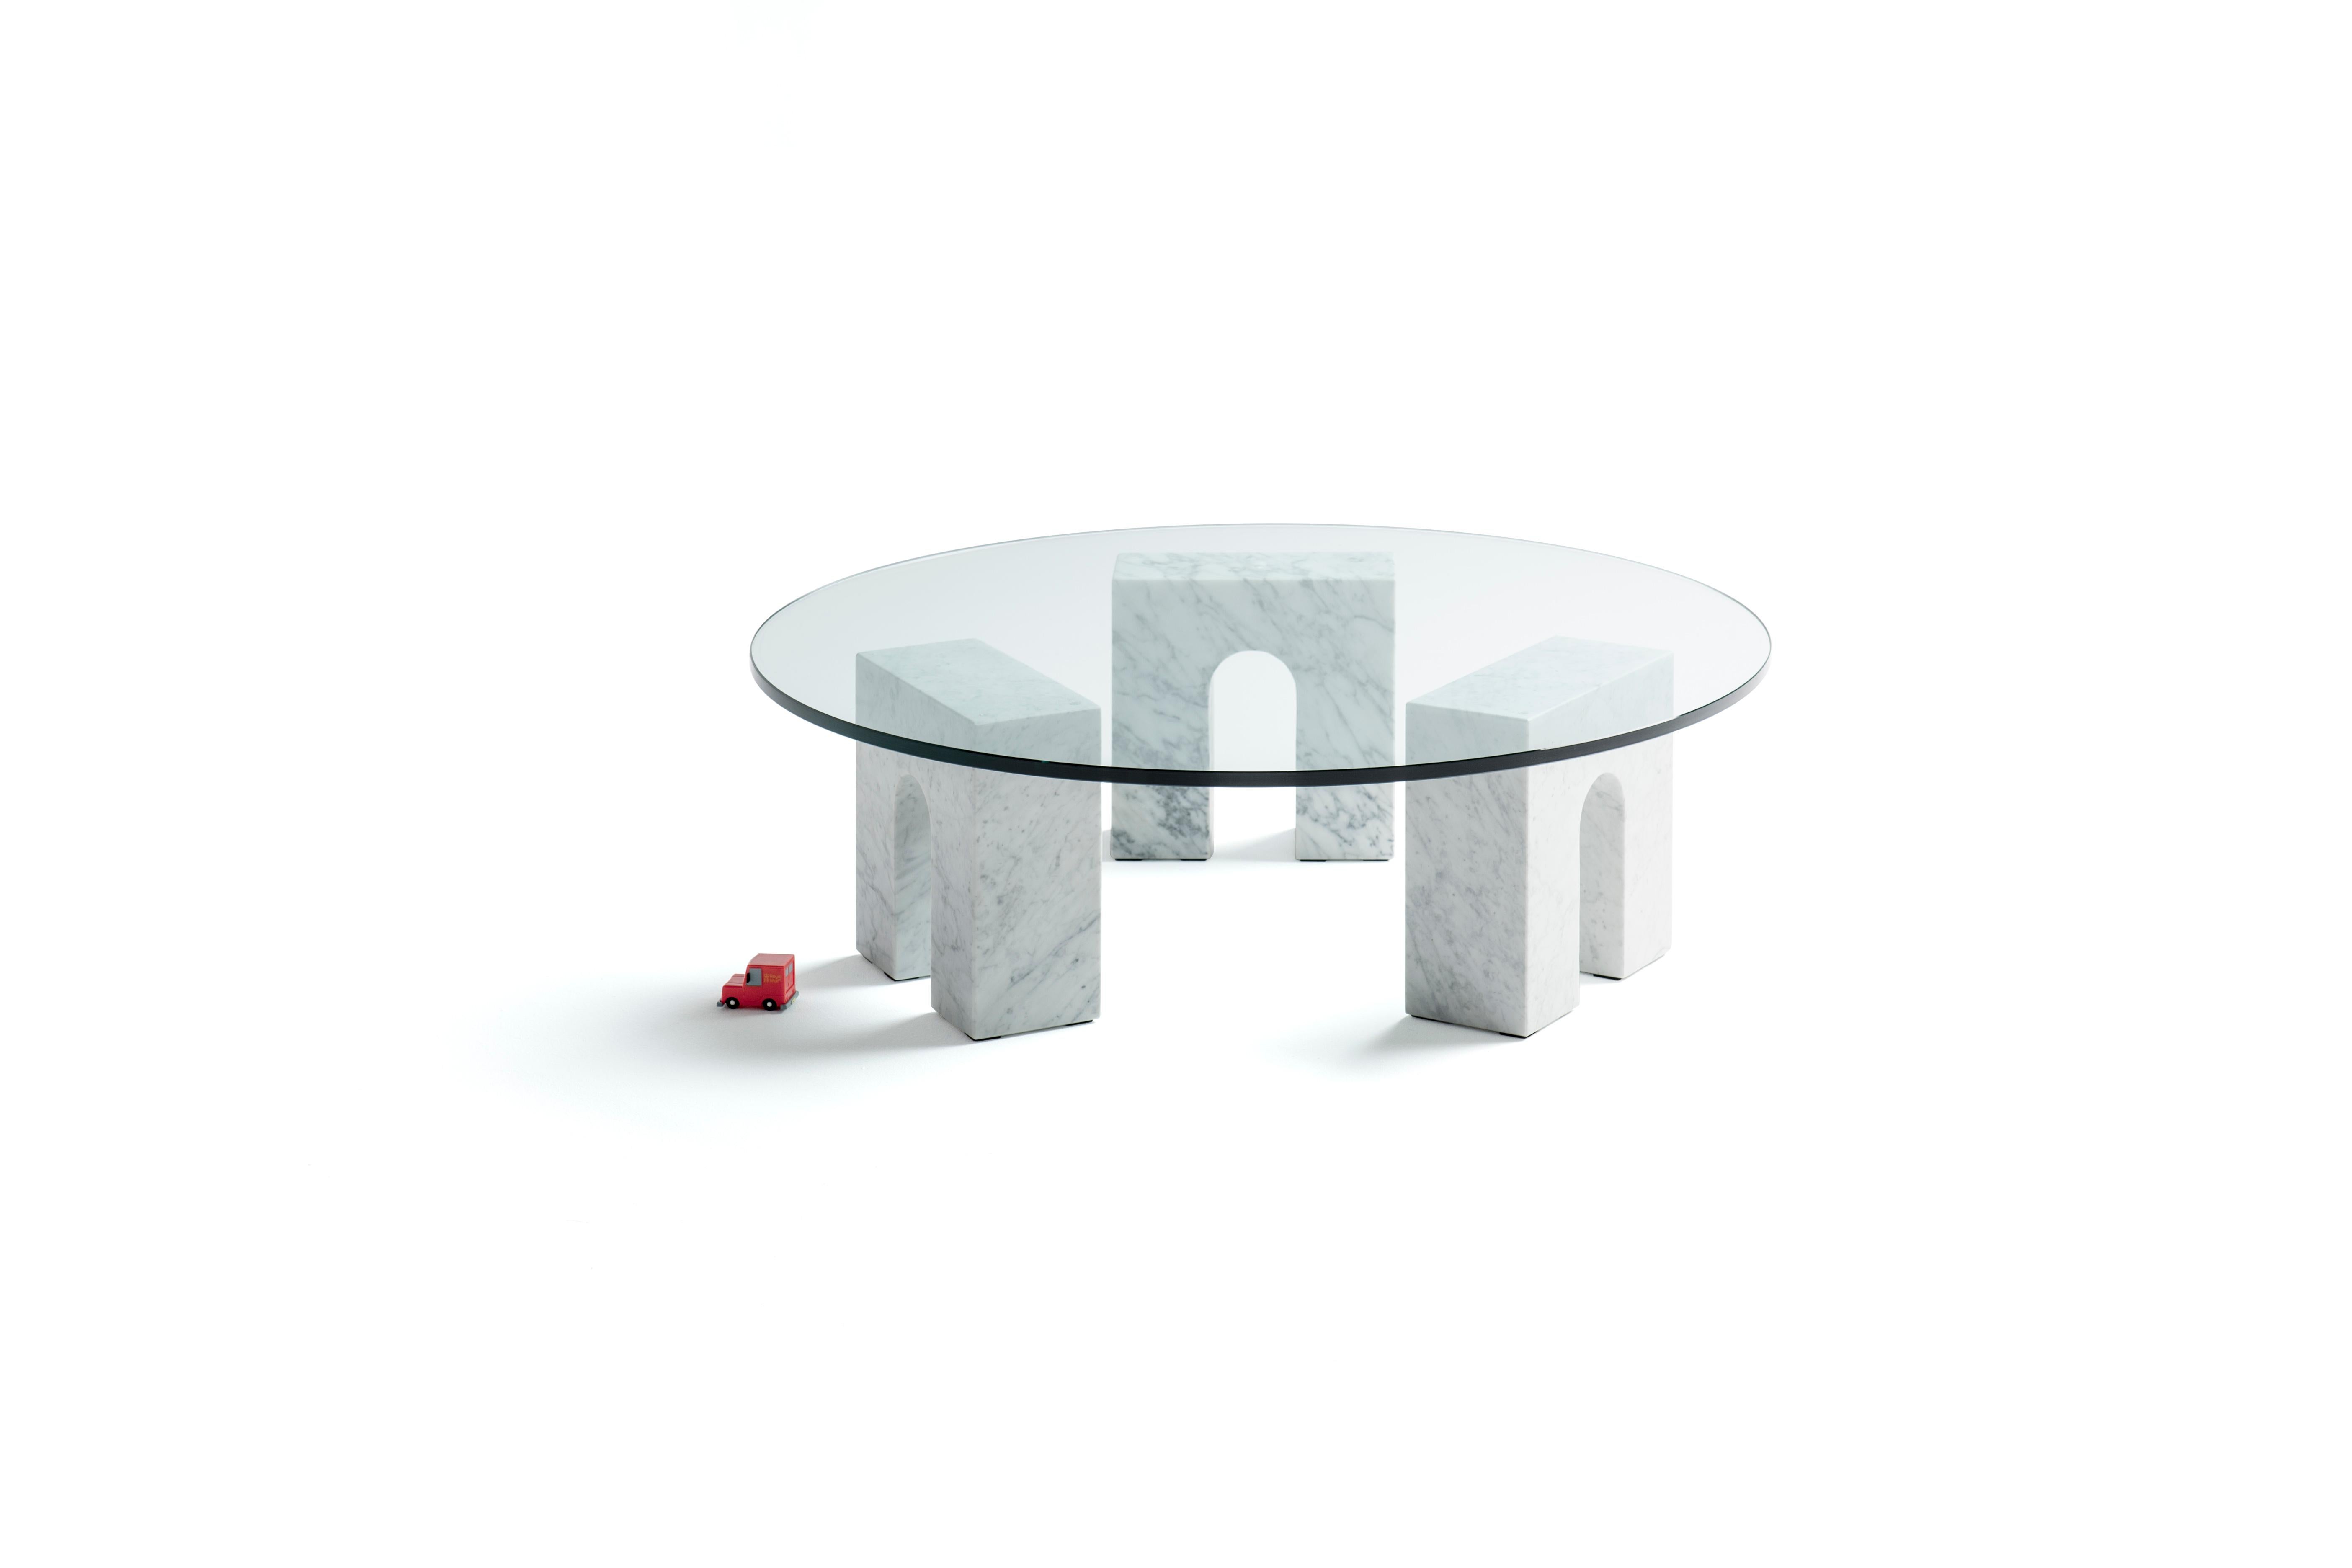 The Arch Table is a minimalist style coffee table consisting of three treated Carrara marble bases and a round shaped tempered glass top, all of them assembled in a logical and harmonious way.
Josep Vila Capdevila, head designer of Aparentment, was